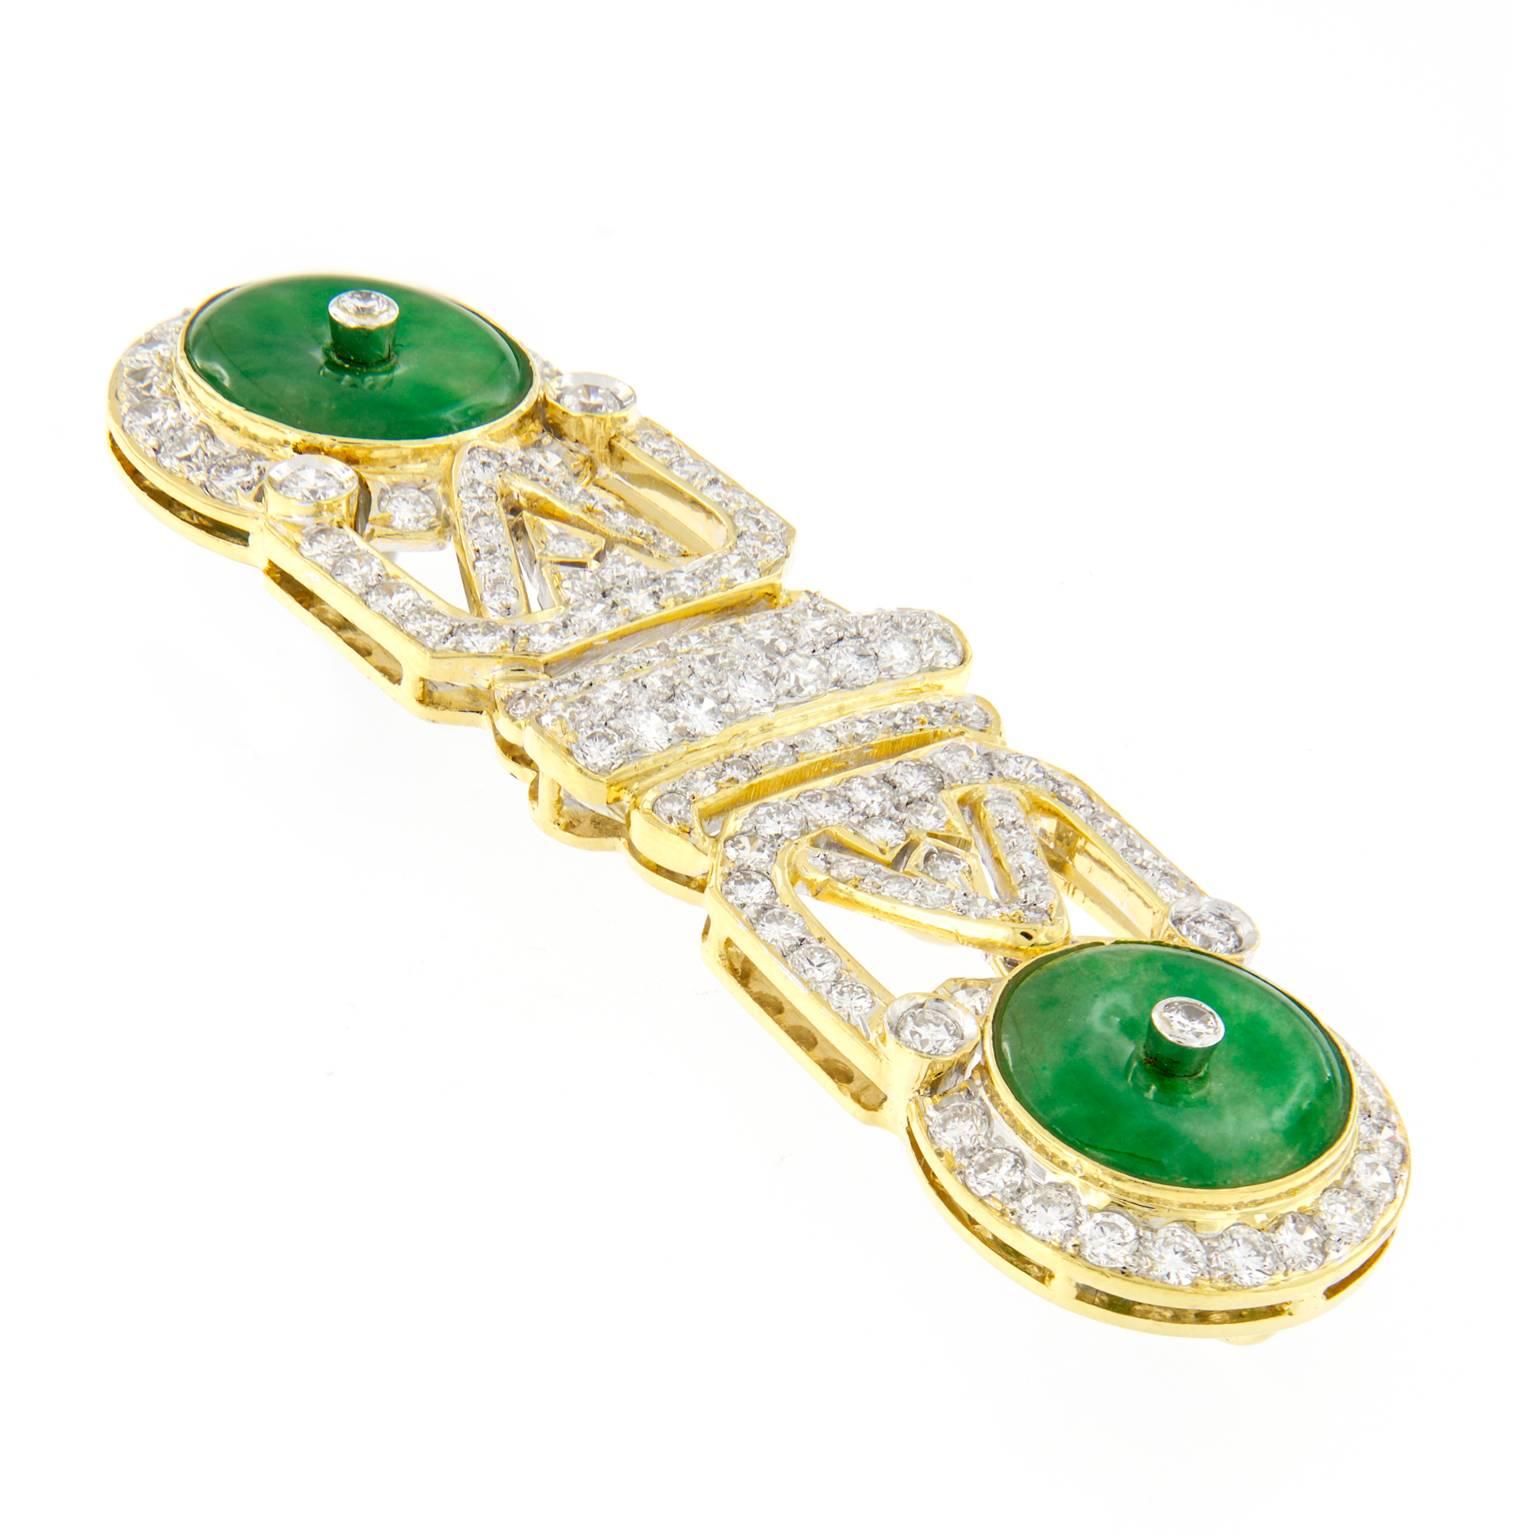 The openwork stylized design crafted in 18k yellow gold features two beautiful apple green semi-transperent jadeite Jade disks with diamond centers. Beautiful Art Deco style pin can also be worn as a pendant!

2